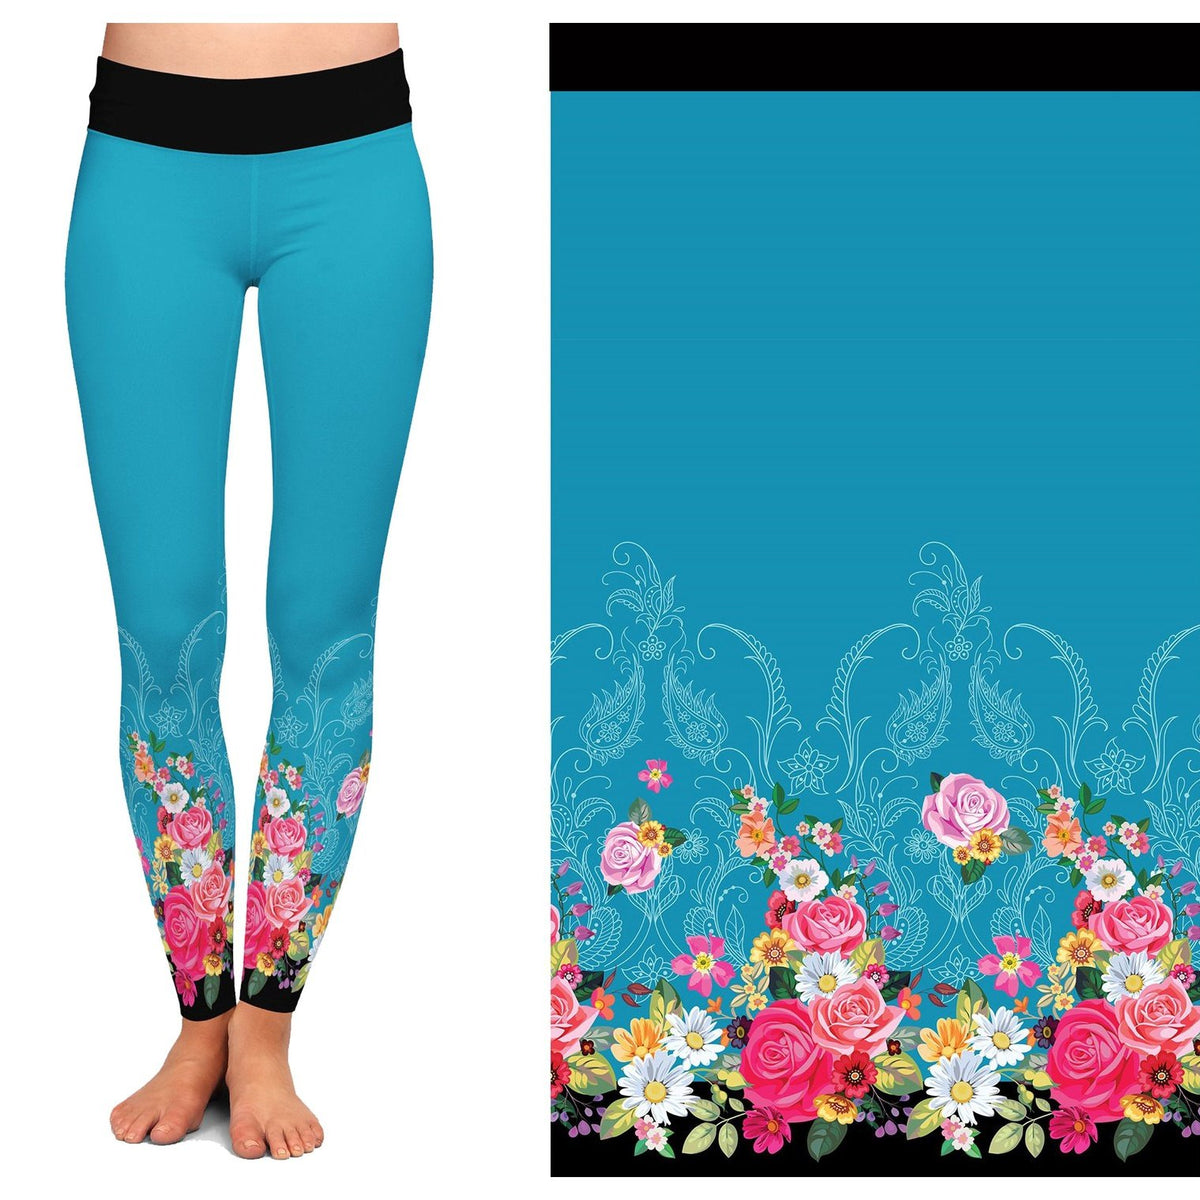 Flower Leggings with Tulips, Daisy, Lilly on a Gray Textured Background with Pocket